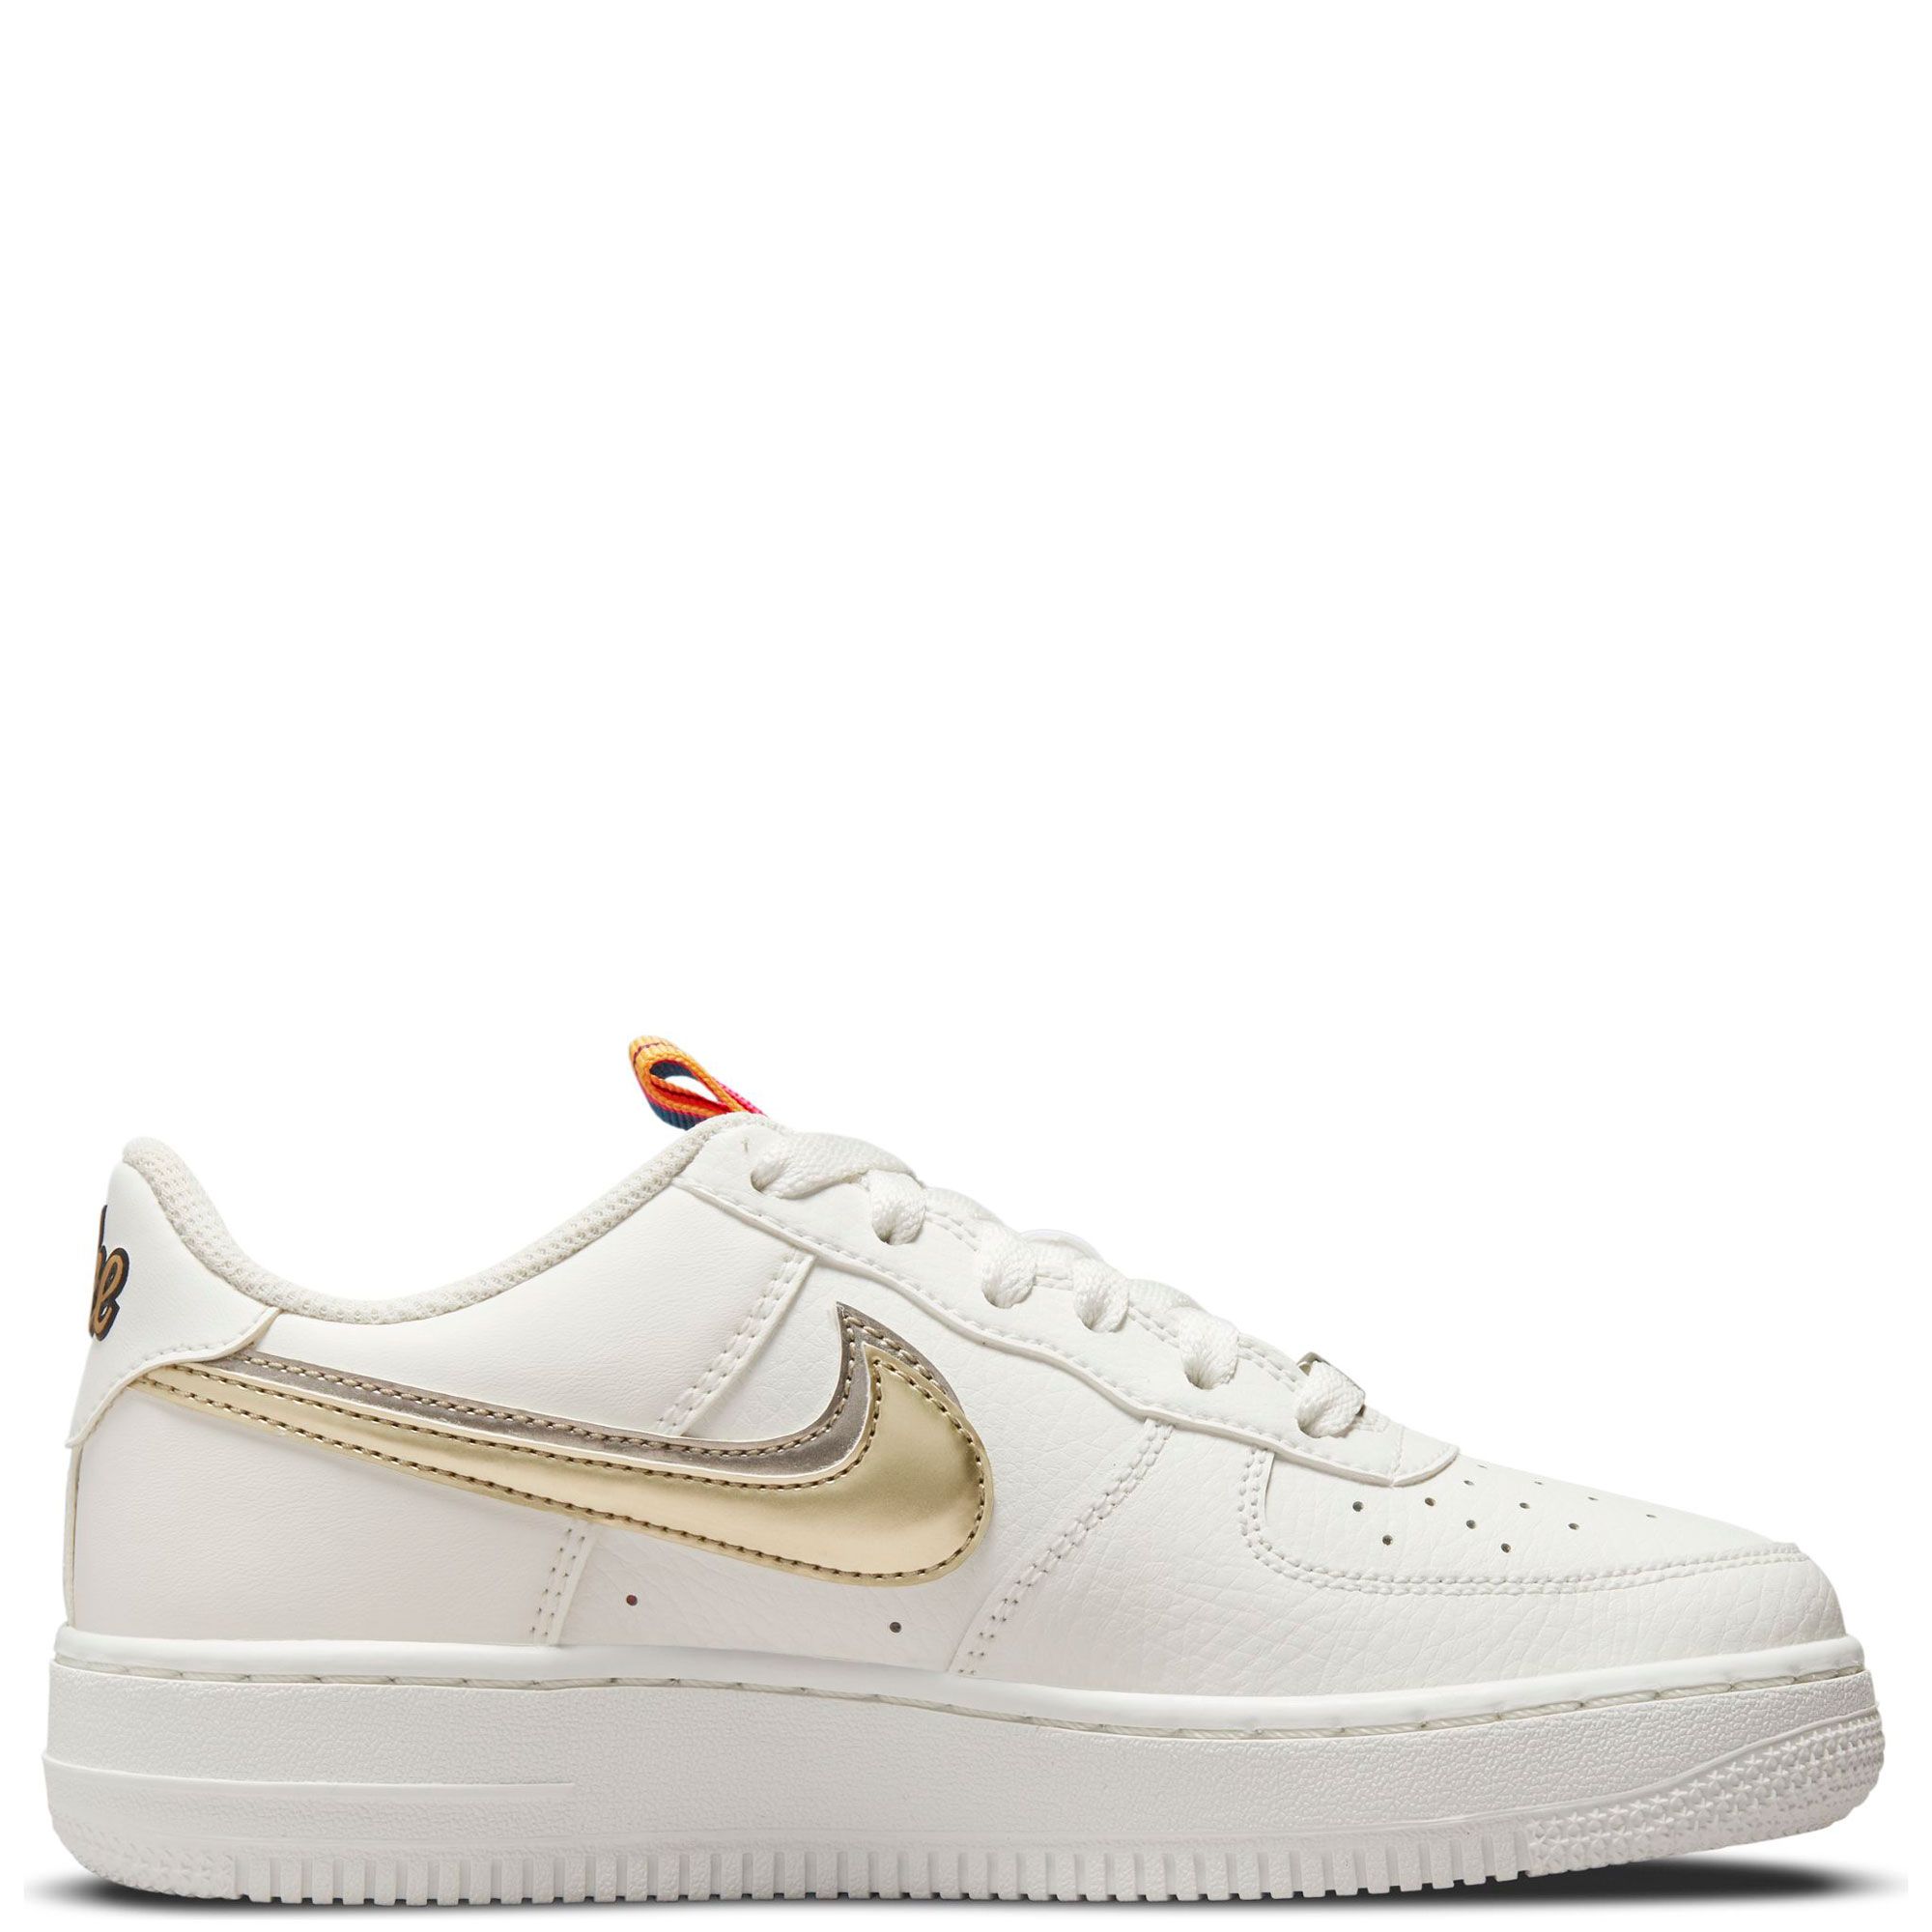 001  Summit White DH9595 - nike air force wheat high outfit for women  images - Nike Air Force 1 LV8 (GS) Big Kids' Shoes Off Noir -  Infrastructure-intelligenceShops Marketplace